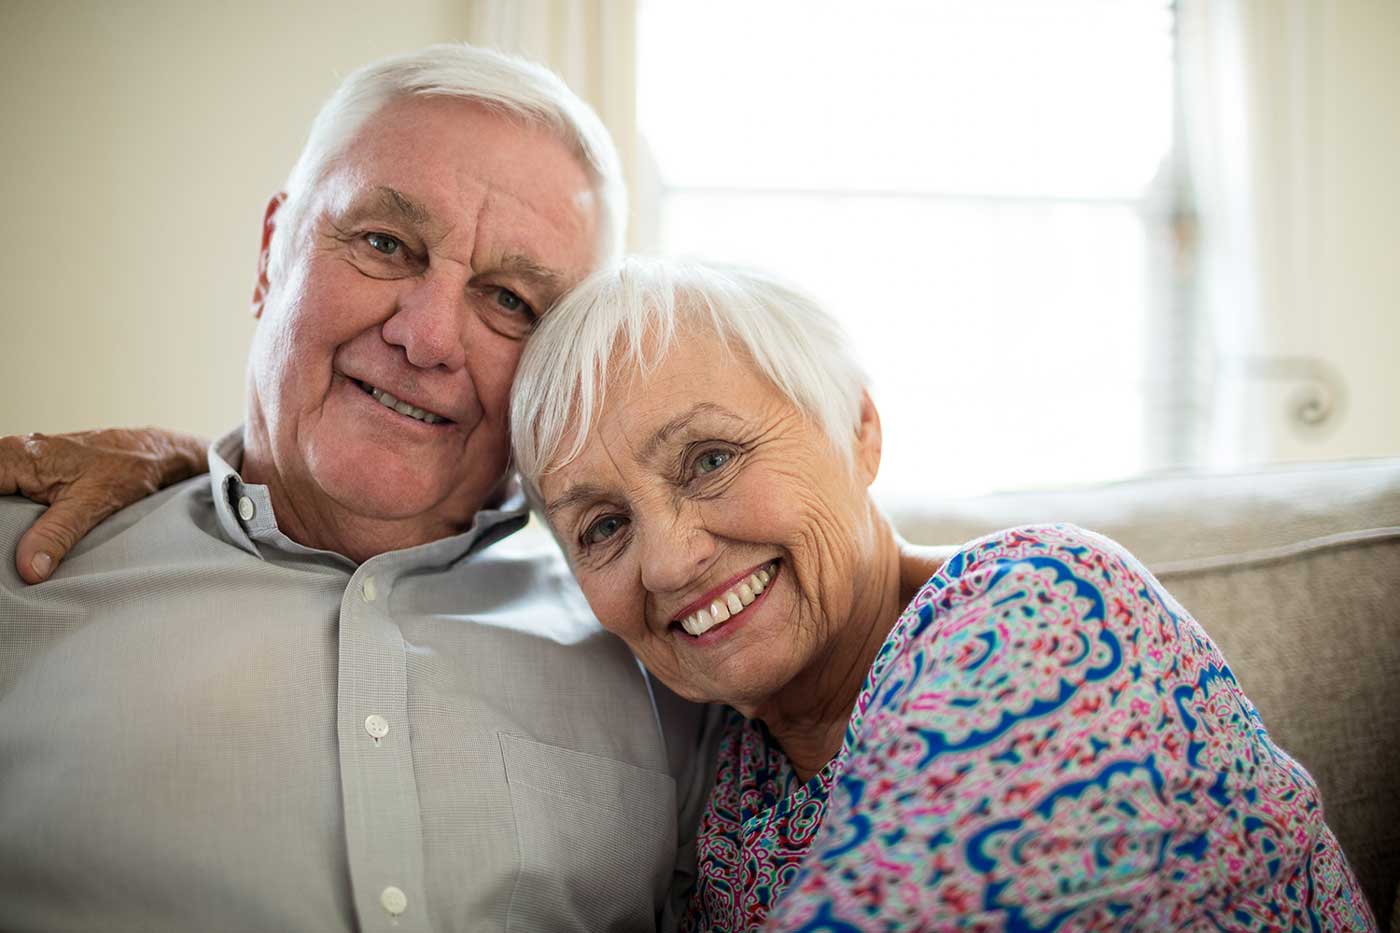 Featured image for “A Parent’s Guide to Visiting a Loved One With Dementia”